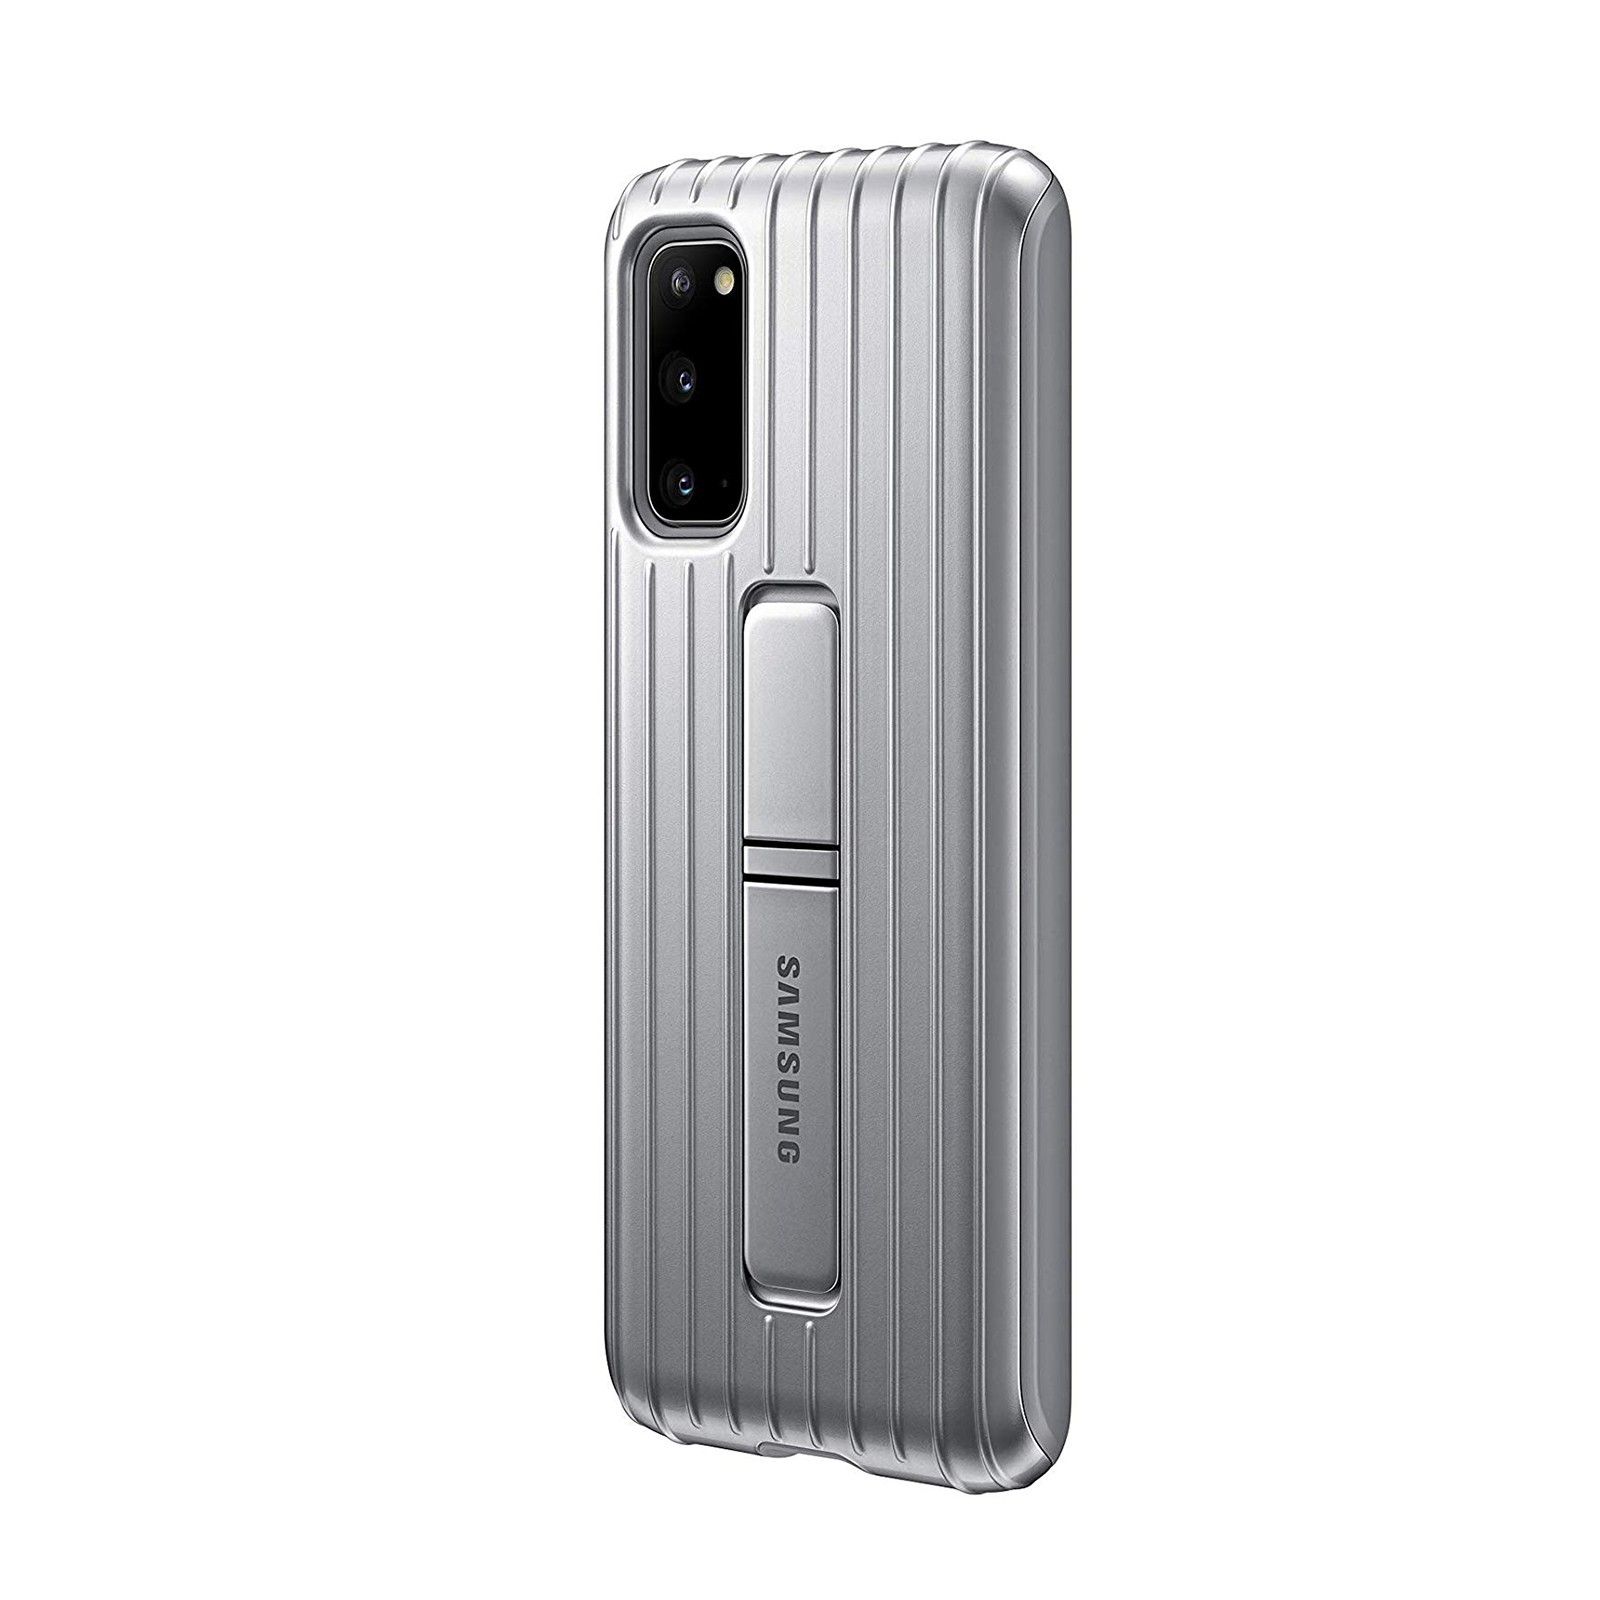 SAMSUNG Silber Samsung, Galaxy STAND GALAXY EF-RG980 Backcover, SILVER, COVER S20, S20 PROTECT